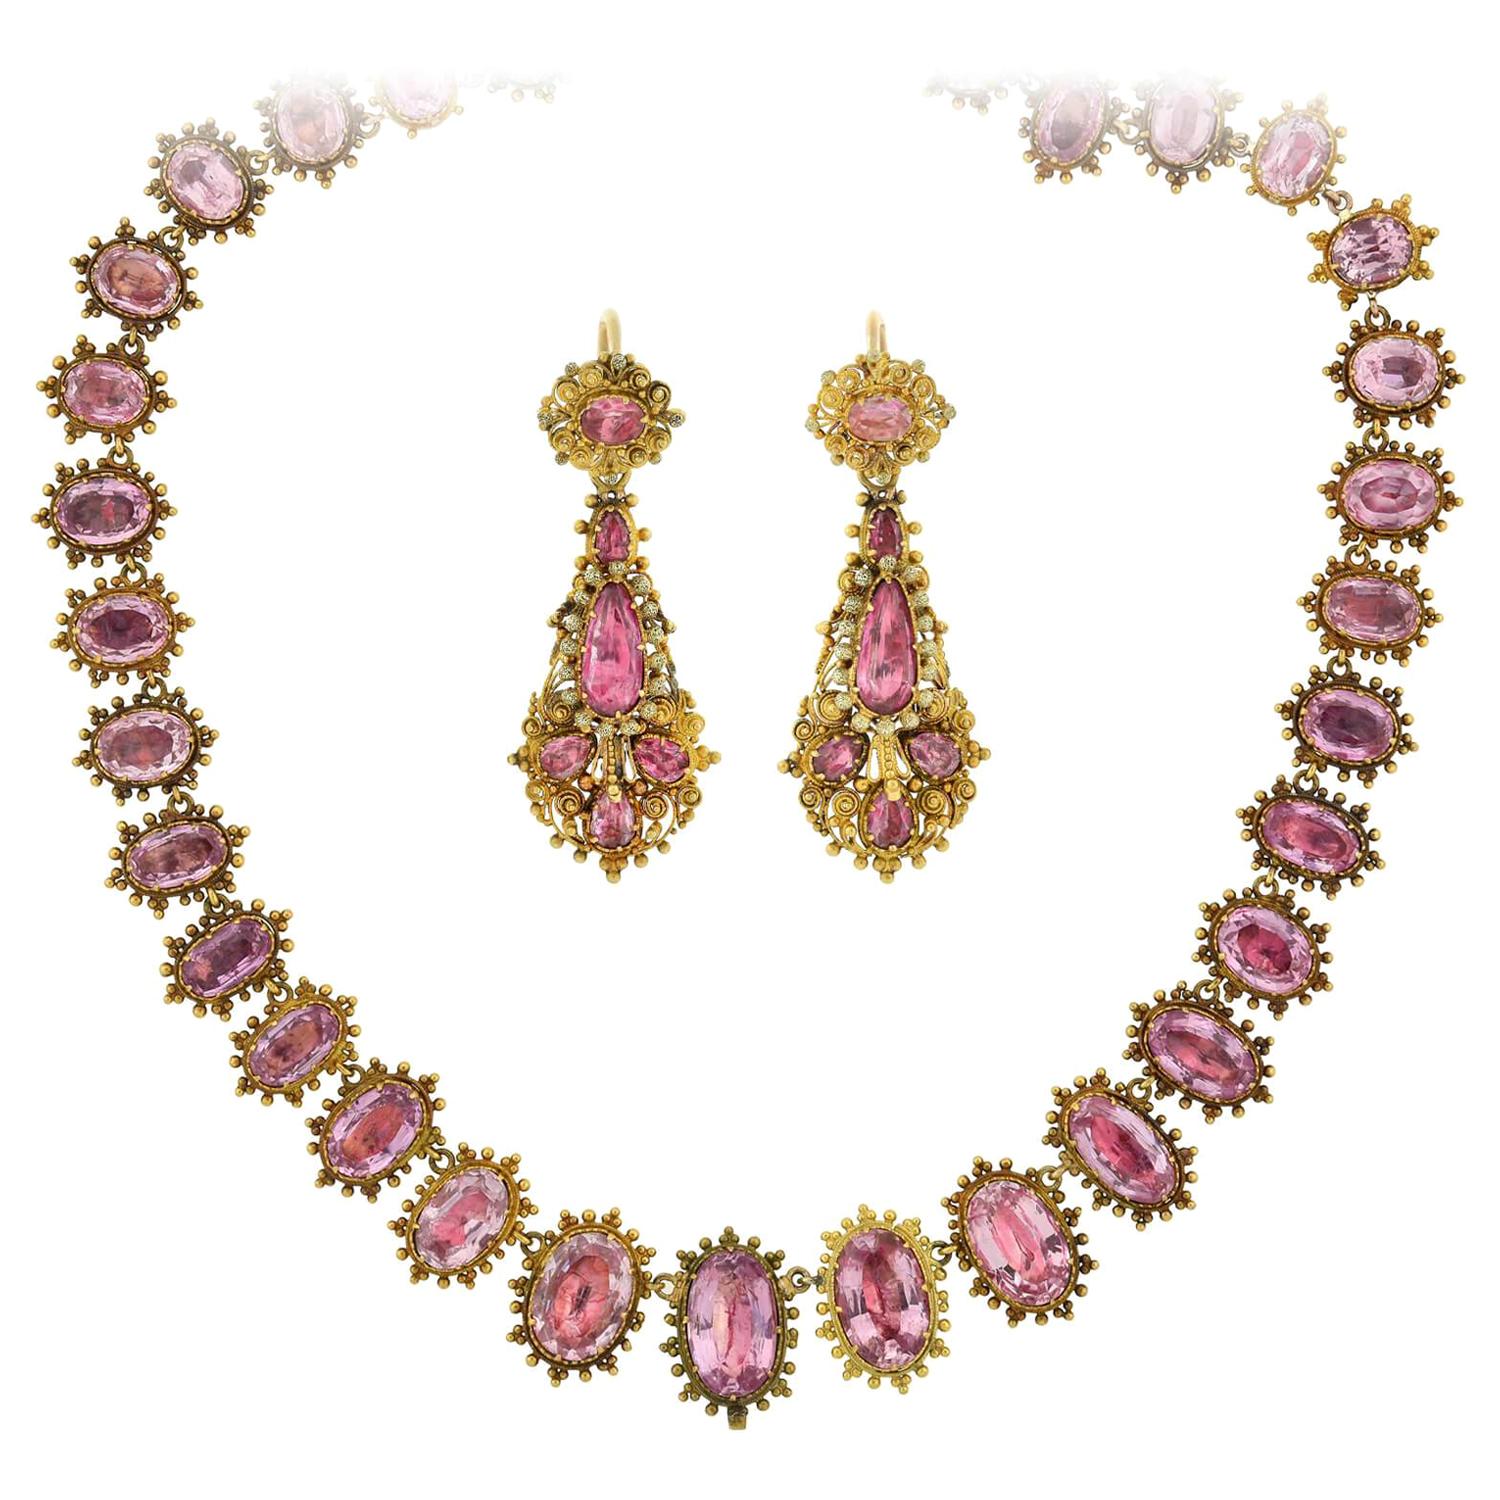 Early Georgian Pink Topaz Necklace and Earring Demi-Parure Set For Sale